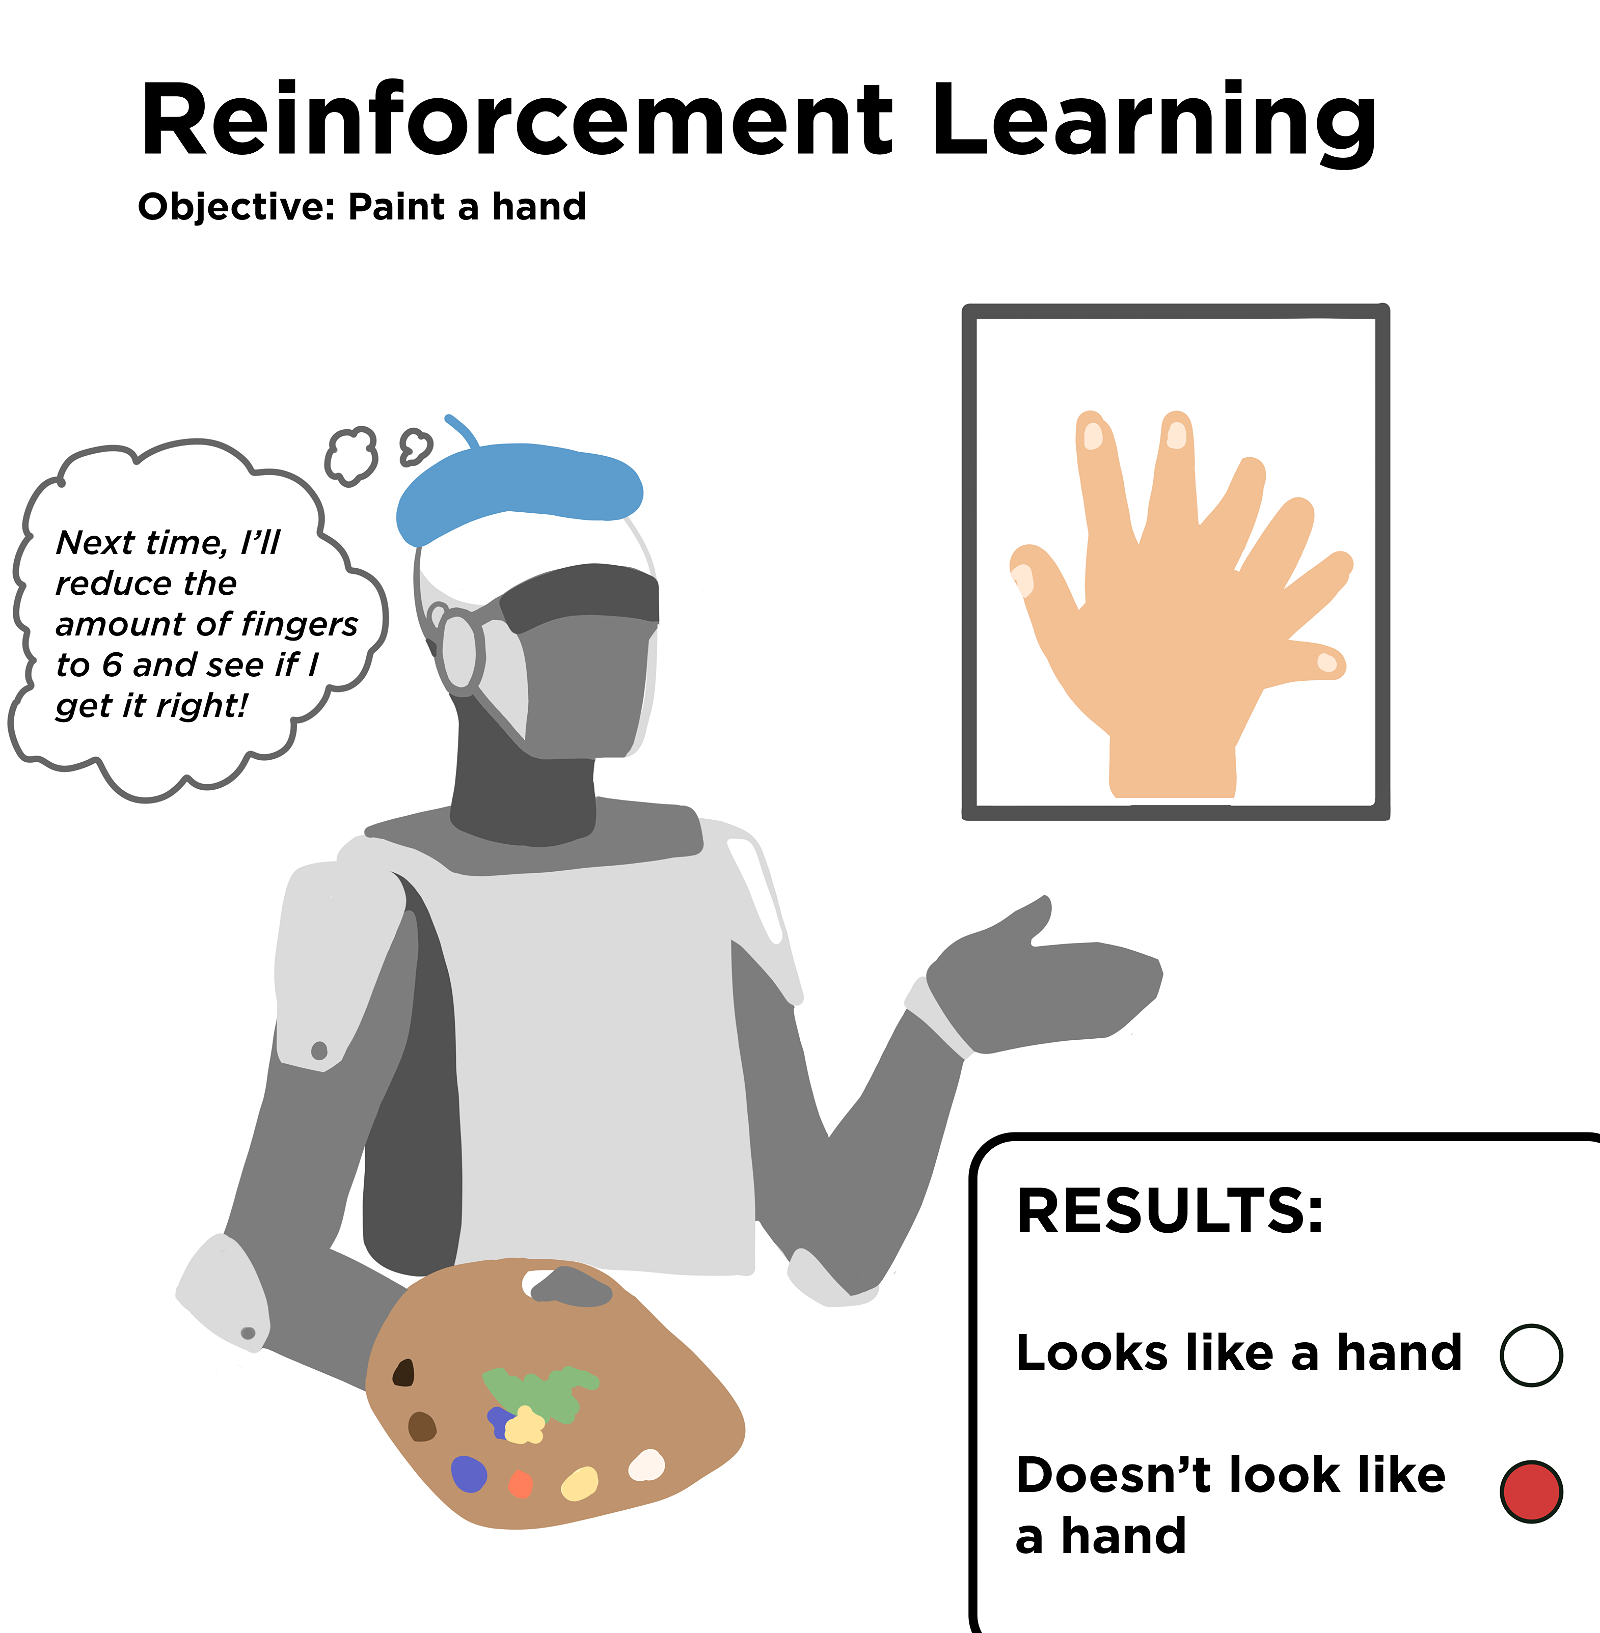 A title at the top states “Reinforcement Learning” with a subtitle underneath that says “Objective: Paint a hand.” A robotic figure wears a blue beret and holds an artist’s palette with white, yellow, orange, blue, brown and black paint, as well as mixed colors showing green, tan, and blue. The figure is gesturing toward a framed painting of a hand. The hand has seven digits. Only four have fingernails. A text box at the lower right says “Results: Looks like a hand” and “Doesn’t look like a hand,” with the latter marked. A thought bubble emanating from the figure’s head says “Next time, I’ll reduce the amount of fingers to 6 and see if I get it right!”